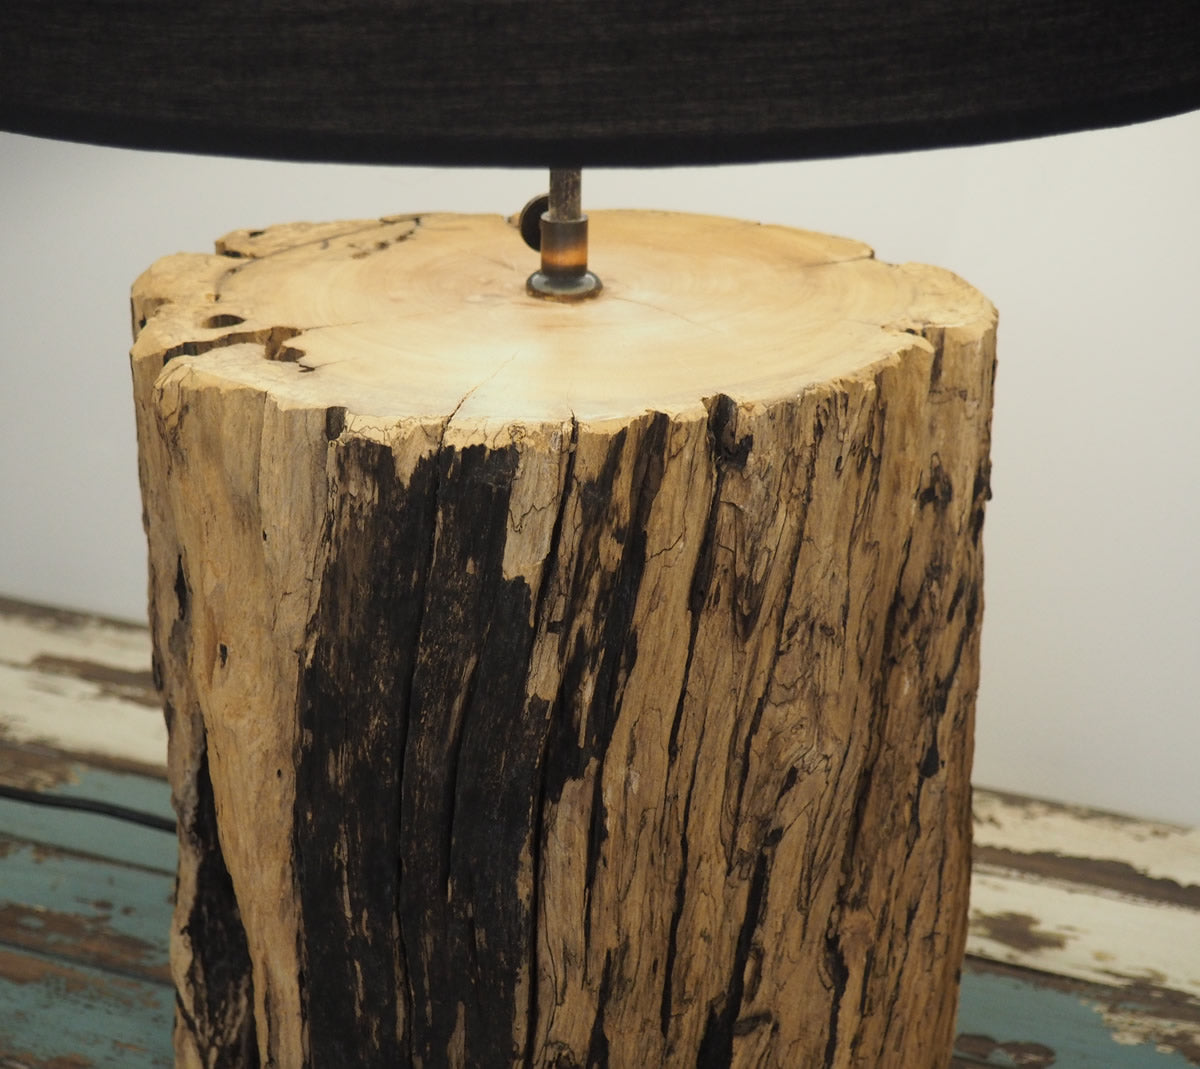 Rustic Wooden Tree Trunk Table Lamp Kenyon Rustic House Cornwall